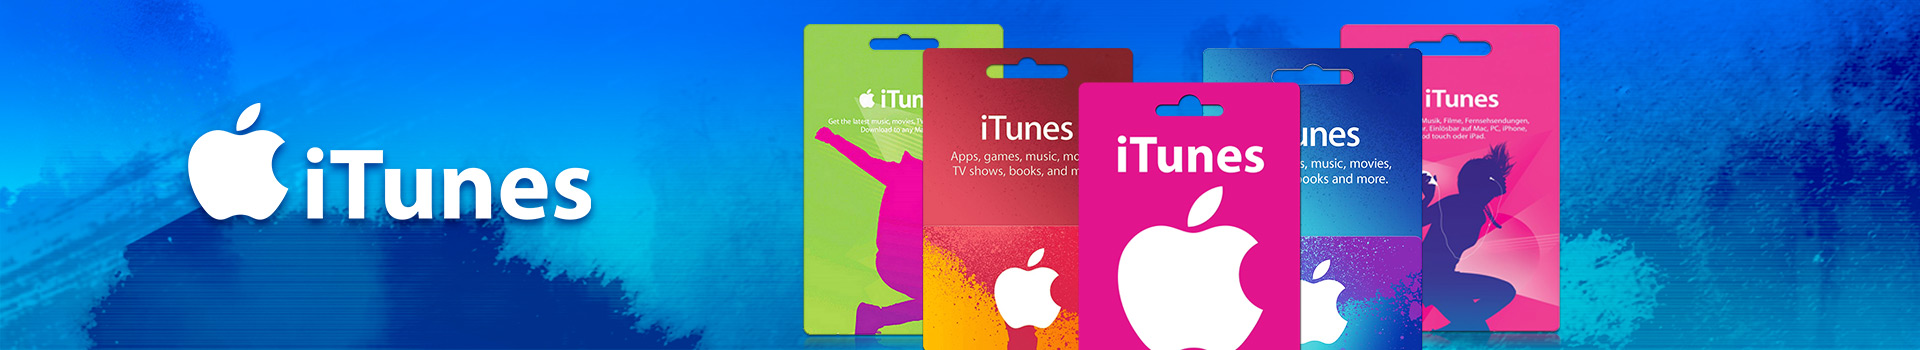 Buy iTunes Gift Card,Cheap iTunes Card for sale with Best ... - 1920 x 350 jpeg 175kB